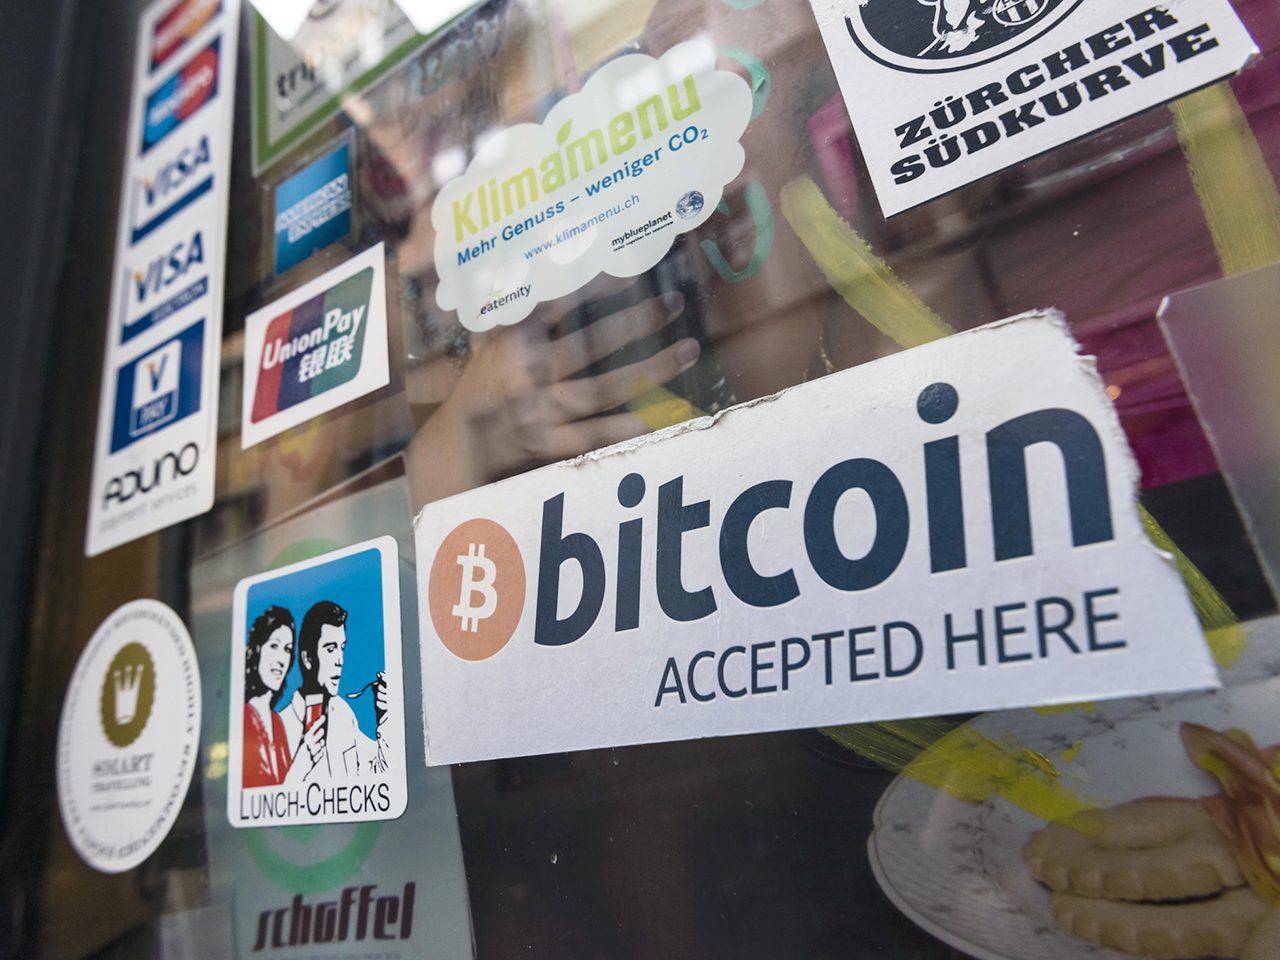 "Bitcoin accepted" sign in the window of "Kafi Schoffel", a coffee bar in Zurich downtown that accepts Bitcoin as means of payment and houses a Bitcoin ATM.